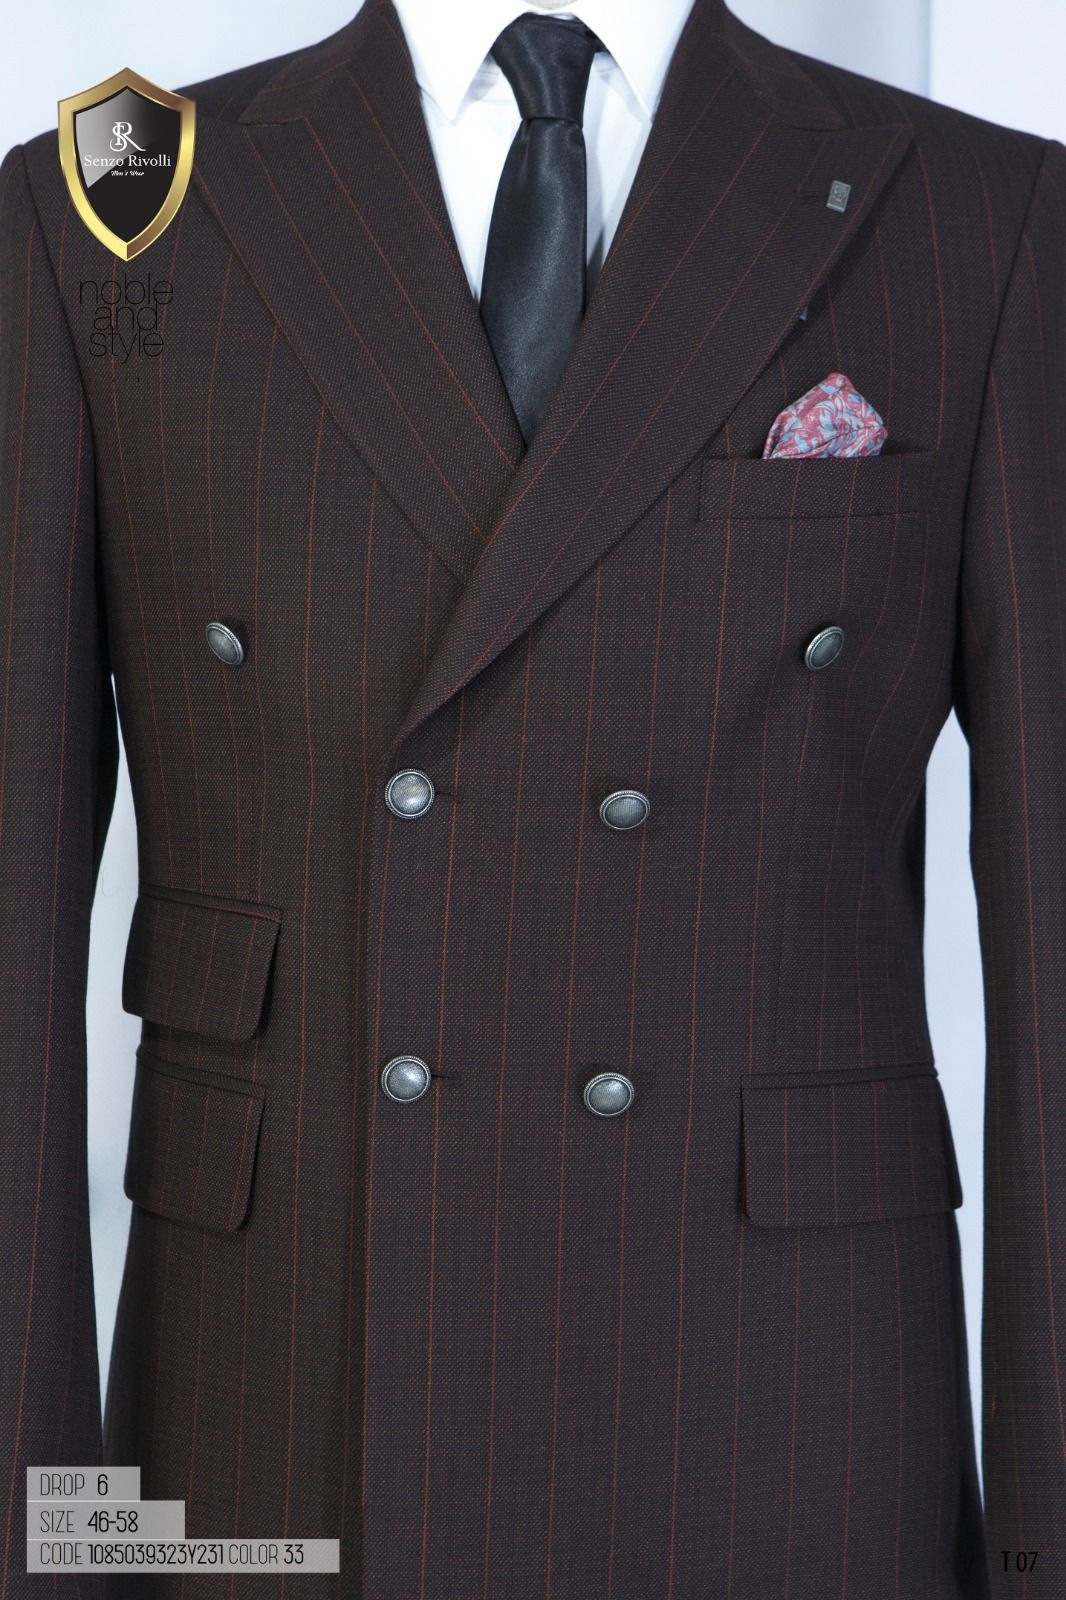 EXECUTIVE COFFEE BROWN BREASTED TURKEY SUIT WITH GREY BUTTON